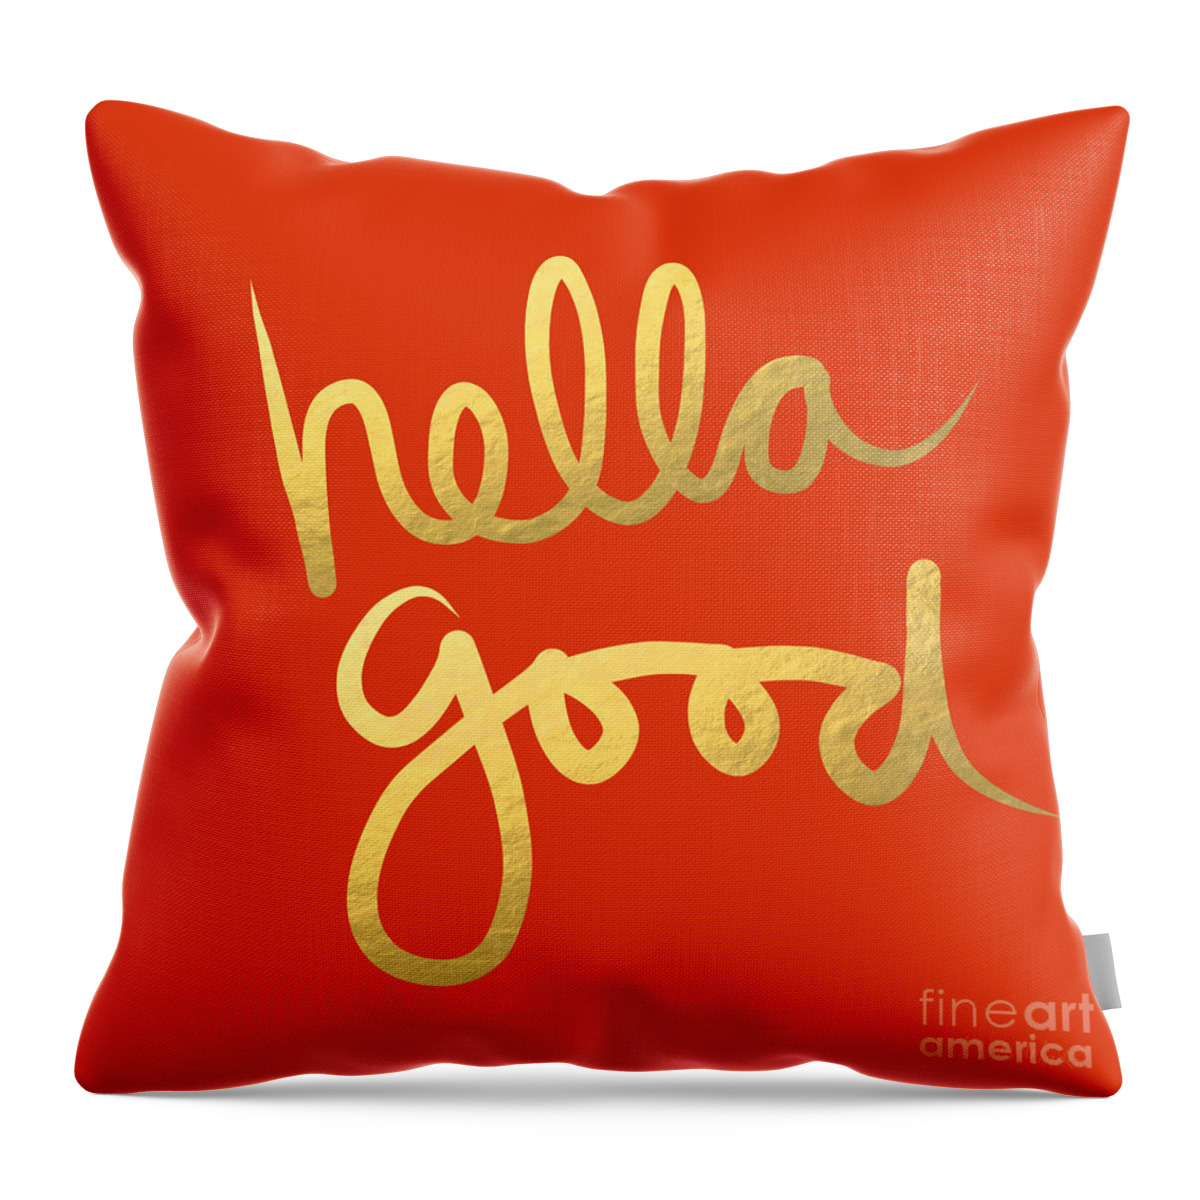 Hella Good Throw Pillow featuring the painting Hella Good in Orange and Gold by Linda Woods